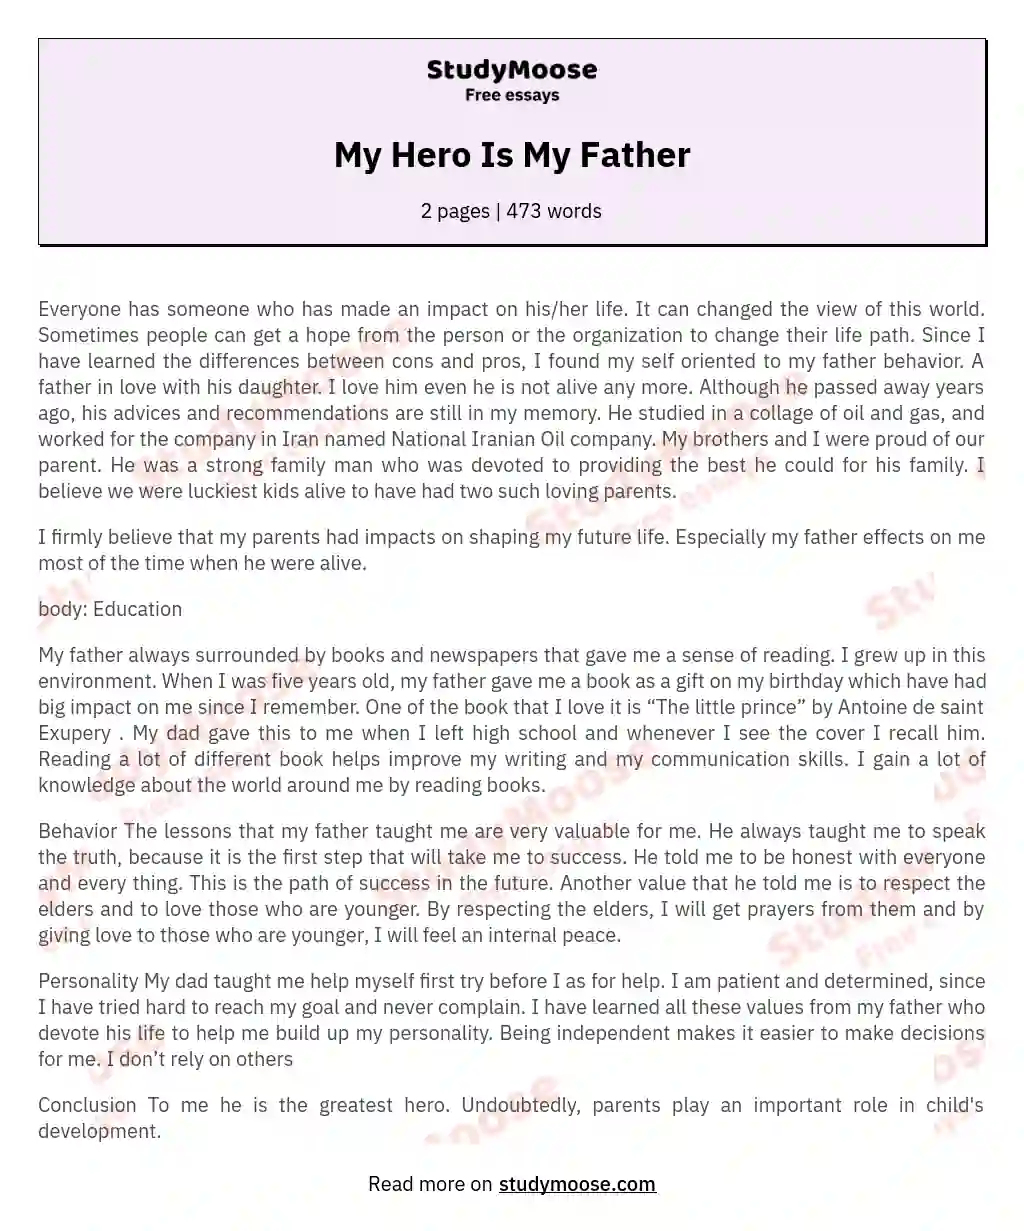 My Hero Is My Father essay